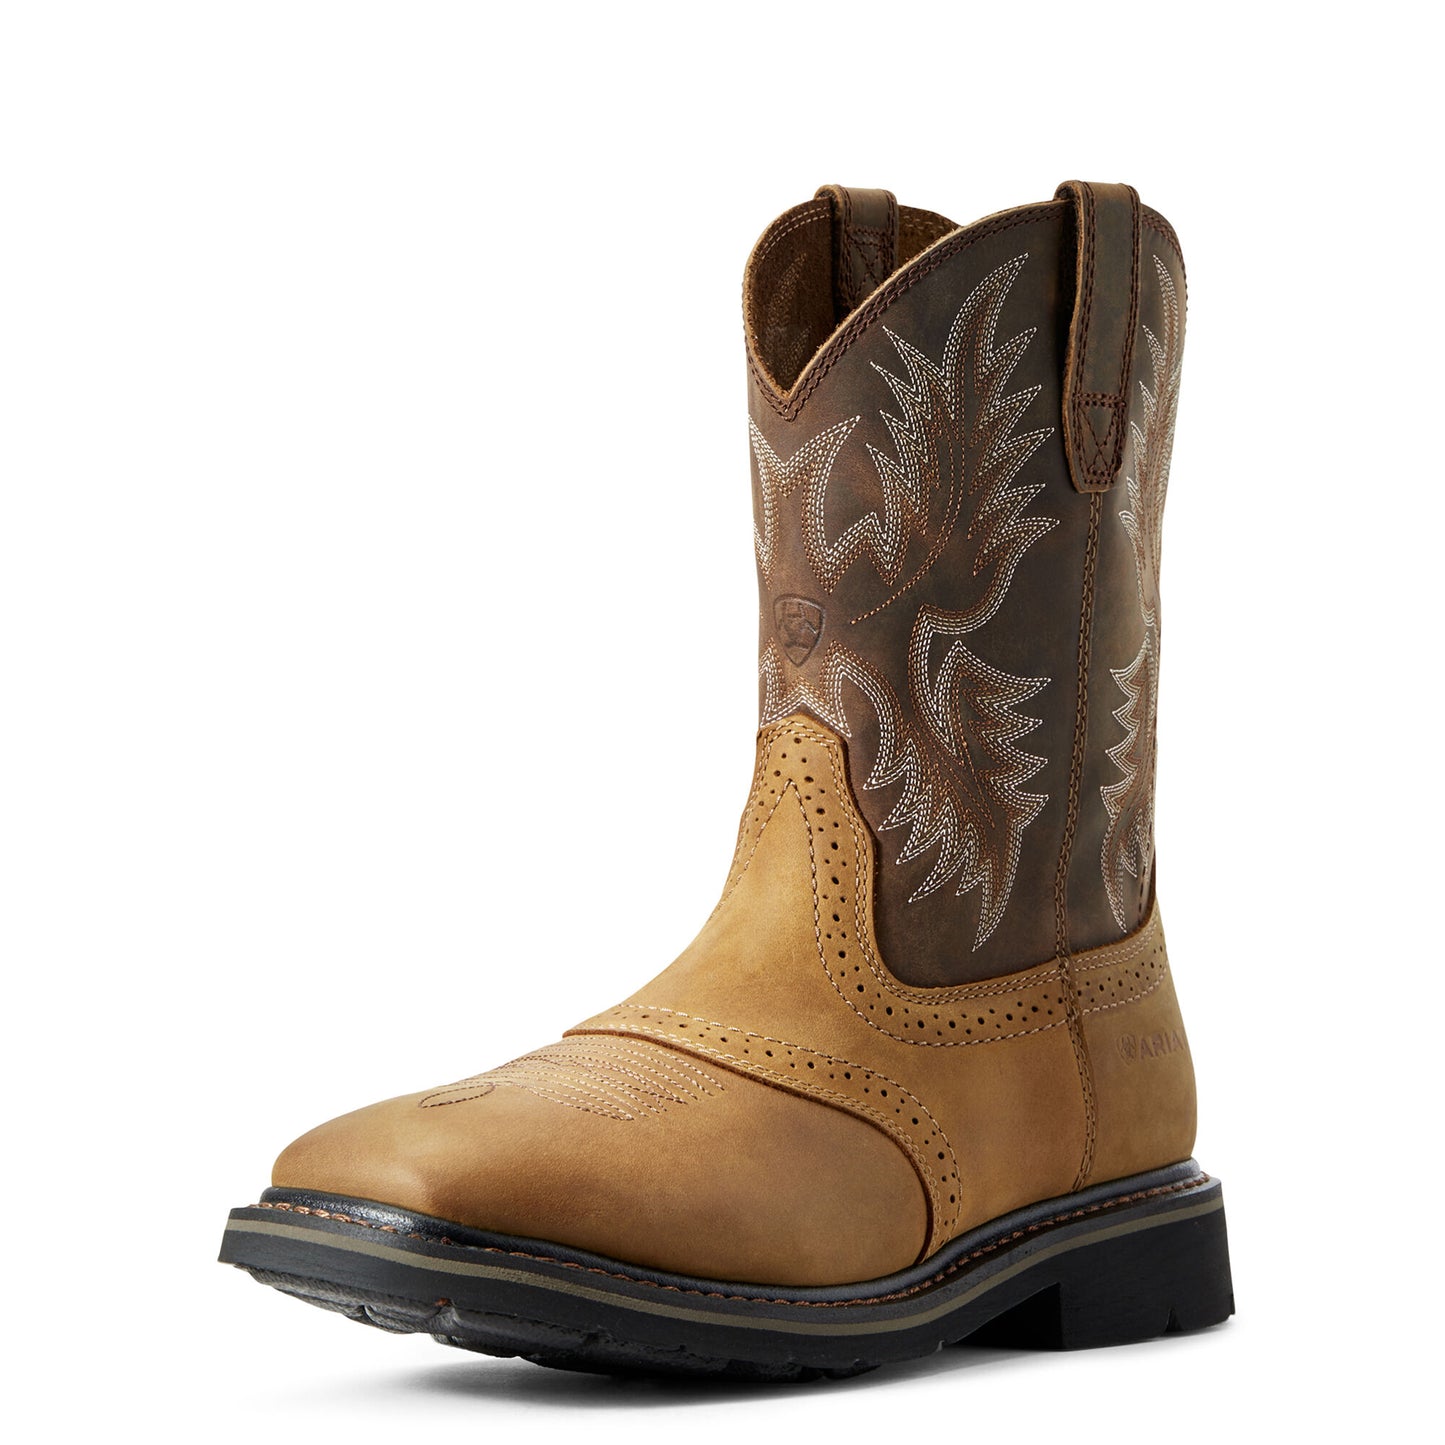 Ariat Men's Sierra Wide Square Toe Boot - Aged Bark - French's Boots